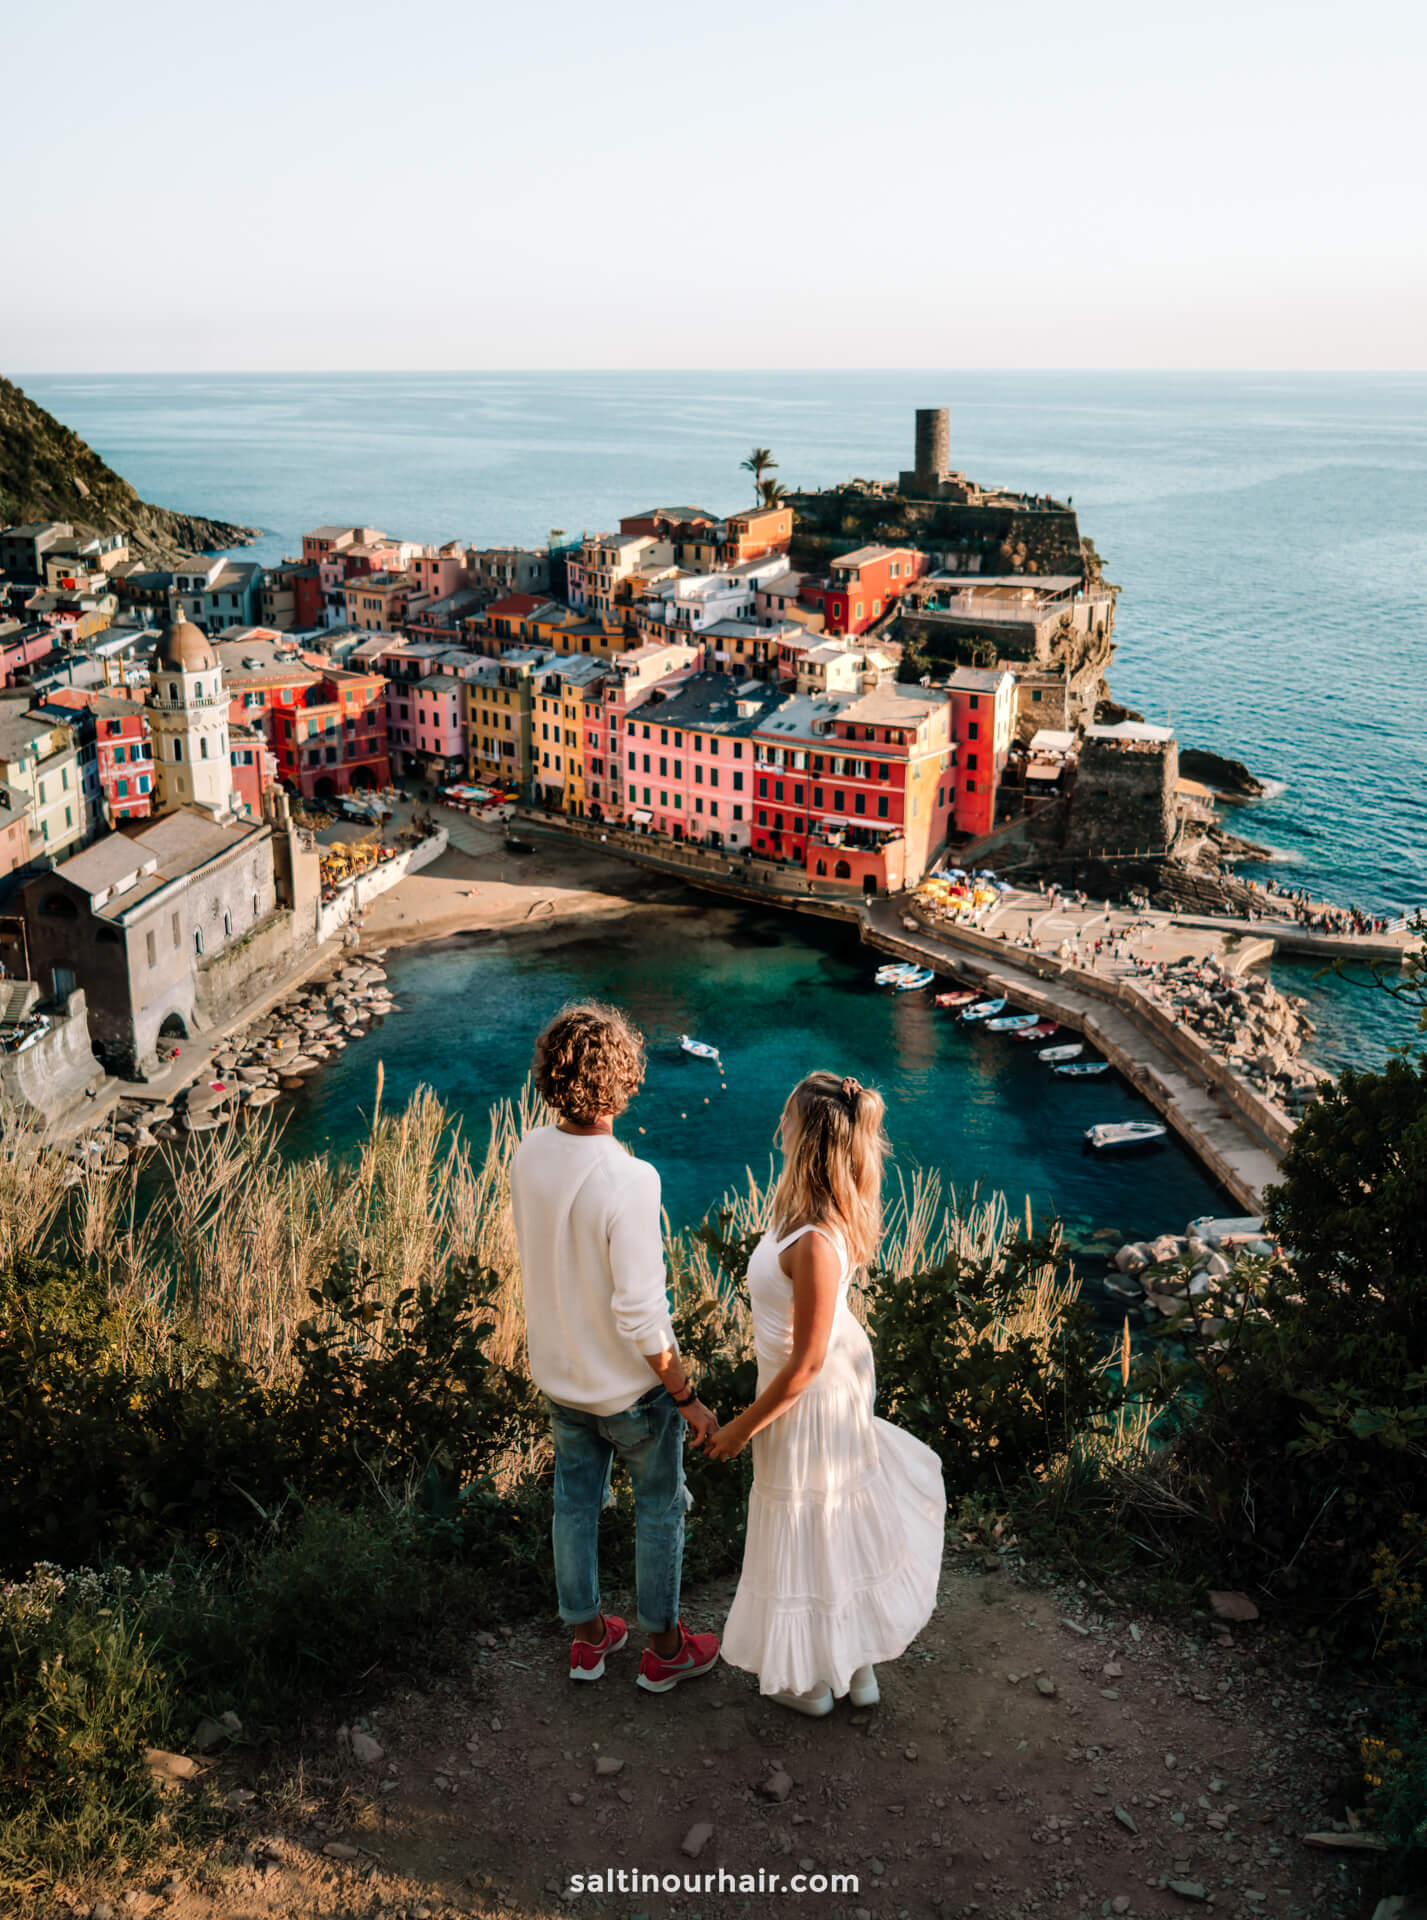 viewpoint cinque terre italy itinerary 7 days